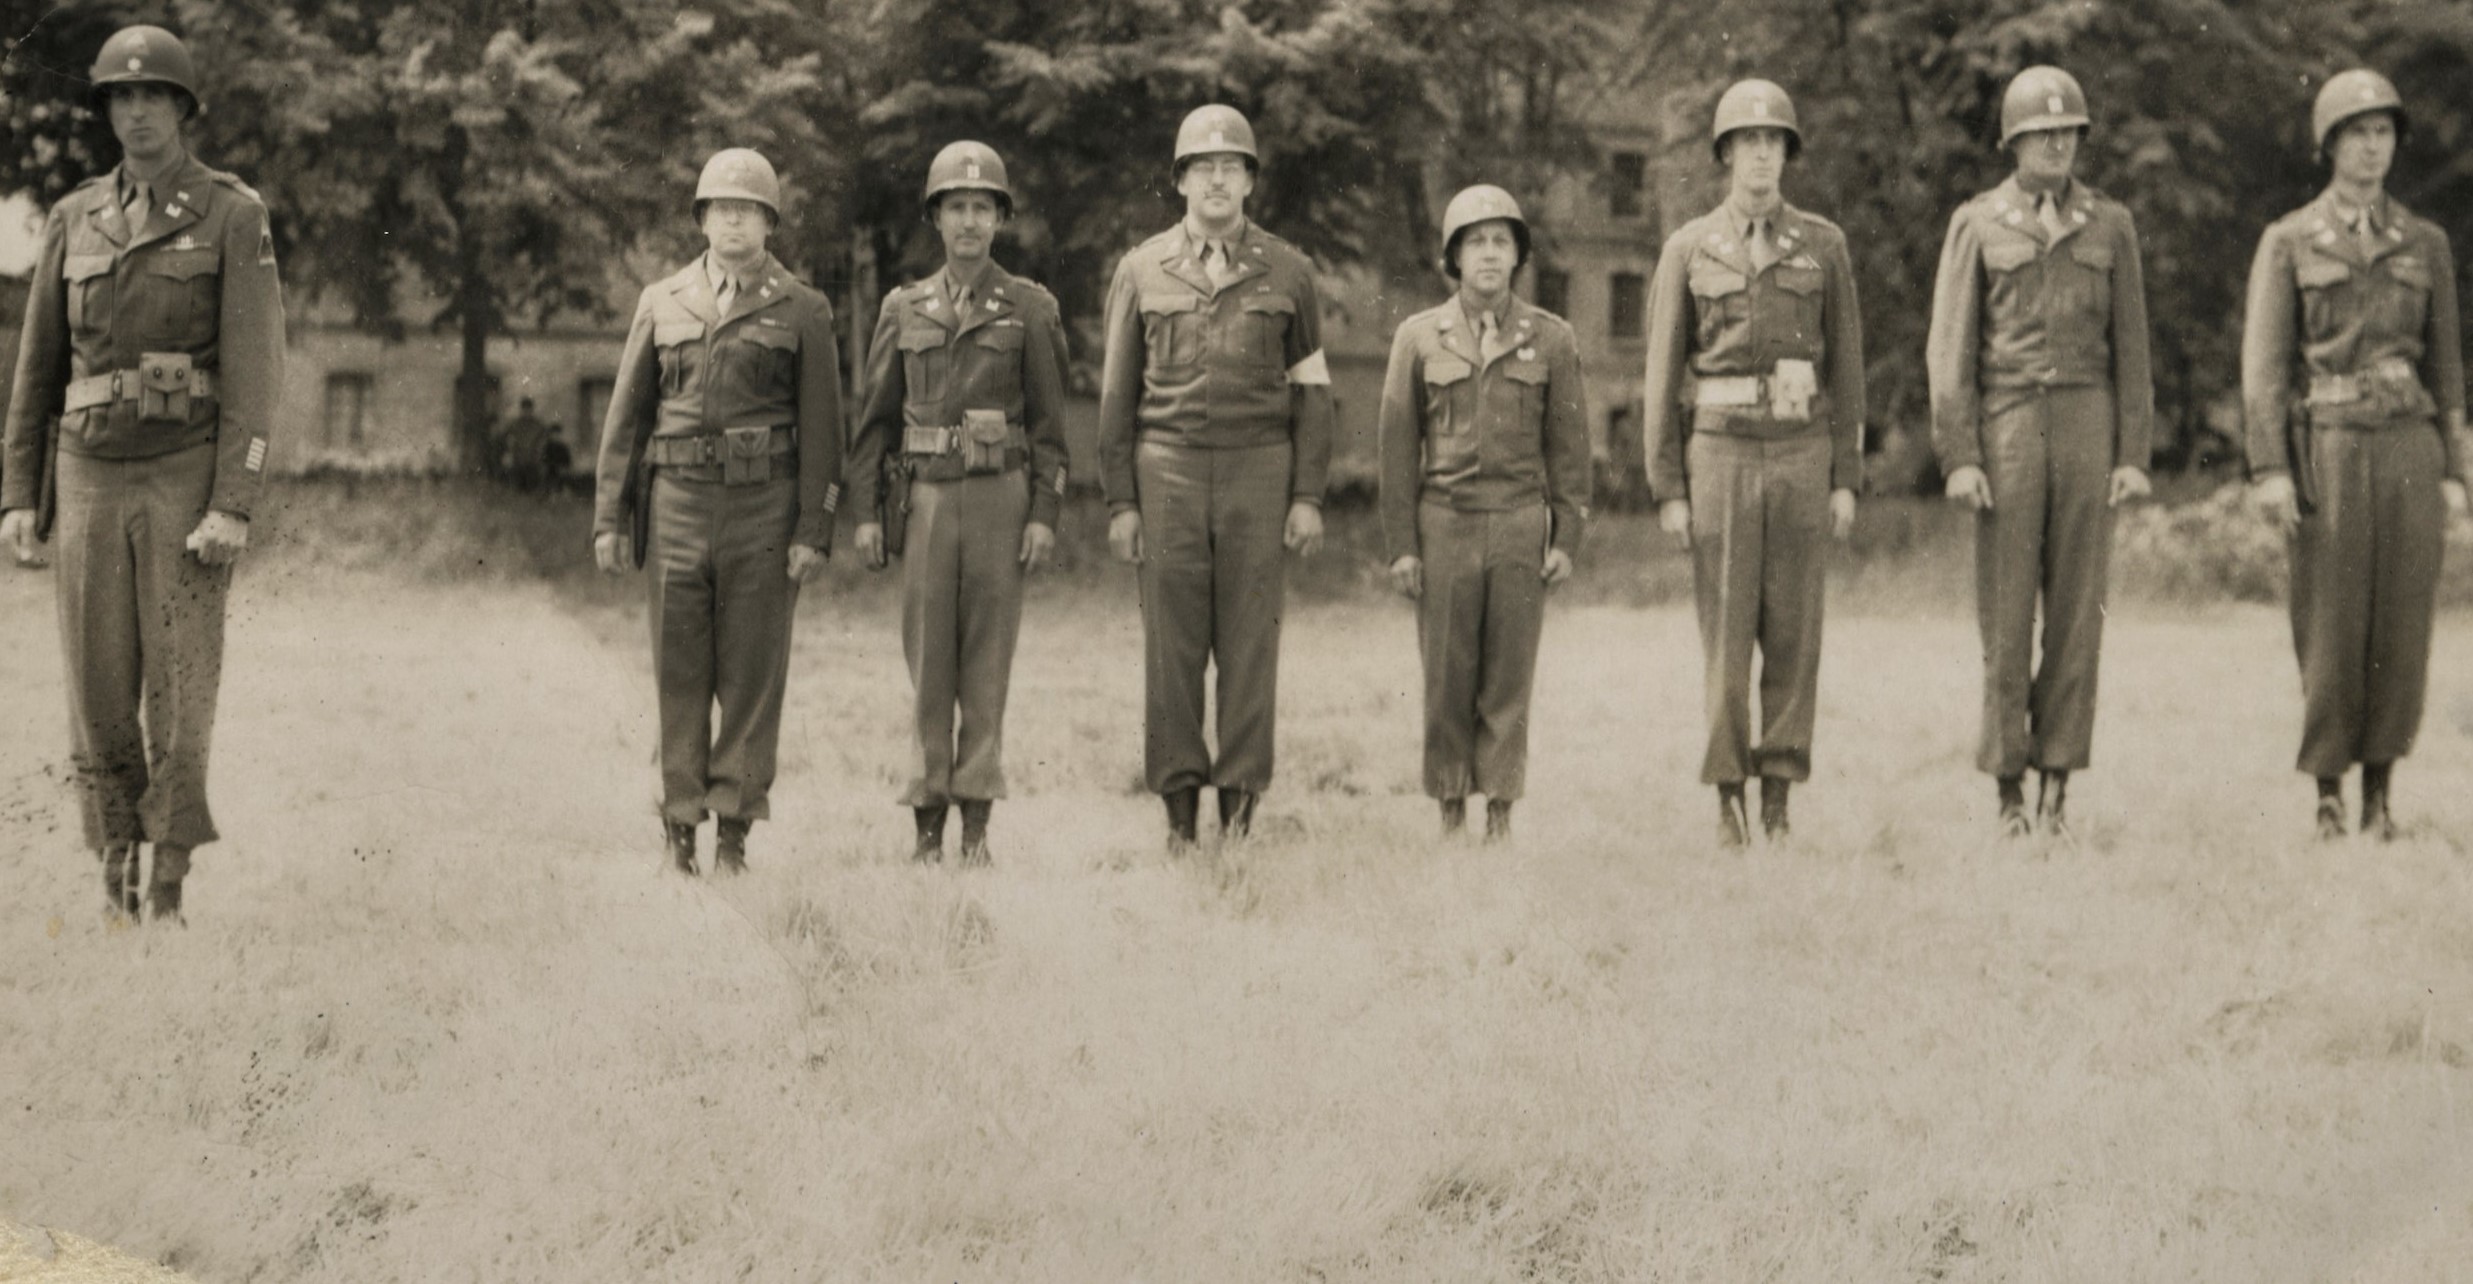 Captains of the 17th Armored Engineer Battalion staning at attention. One Captain is of the 48th Medical Battalion. Location and names unknown. (Courtesy and permission by Robert (Rob) Jolliff) 